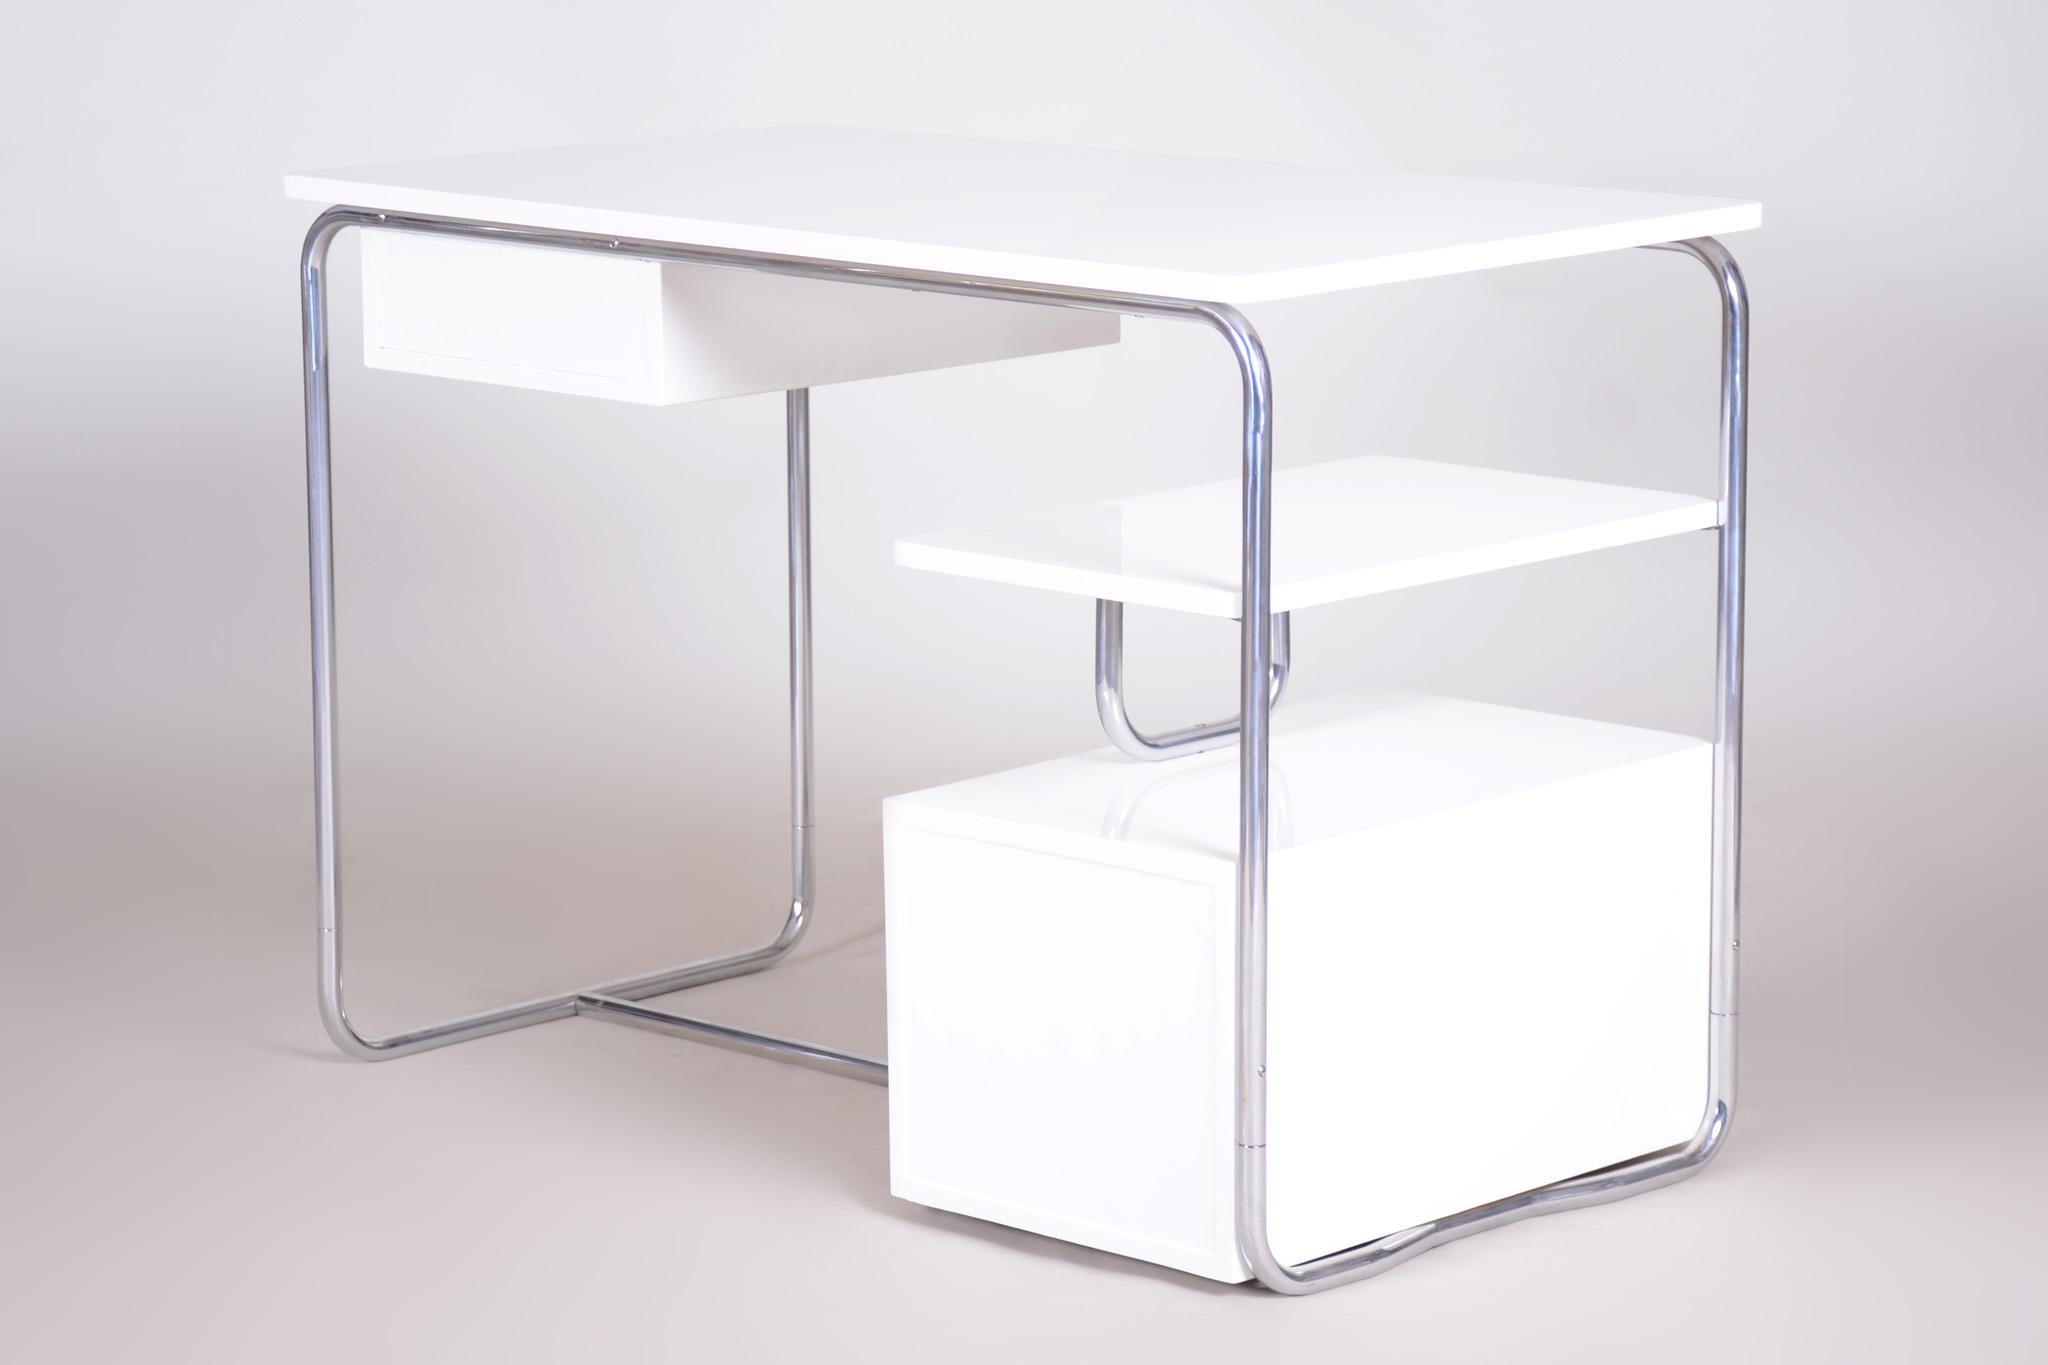 White German Bauhaus Chrome Plated Steel Writing Desk, Made in the 1930s In Good Condition For Sale In Horomerice, CZ